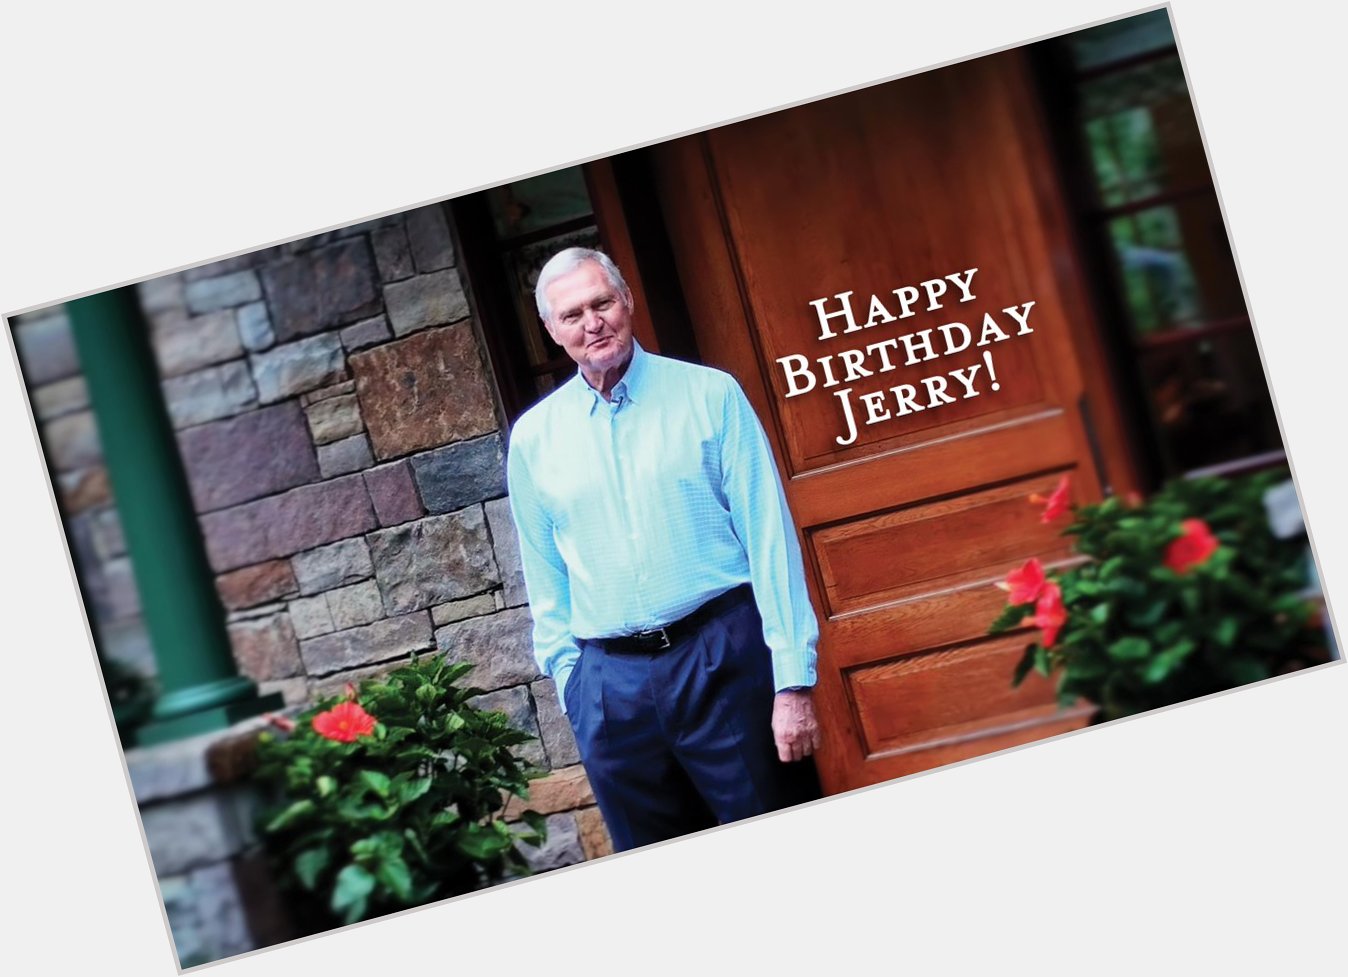 Happy Birthday to our friend and GSC member Jerry West!  